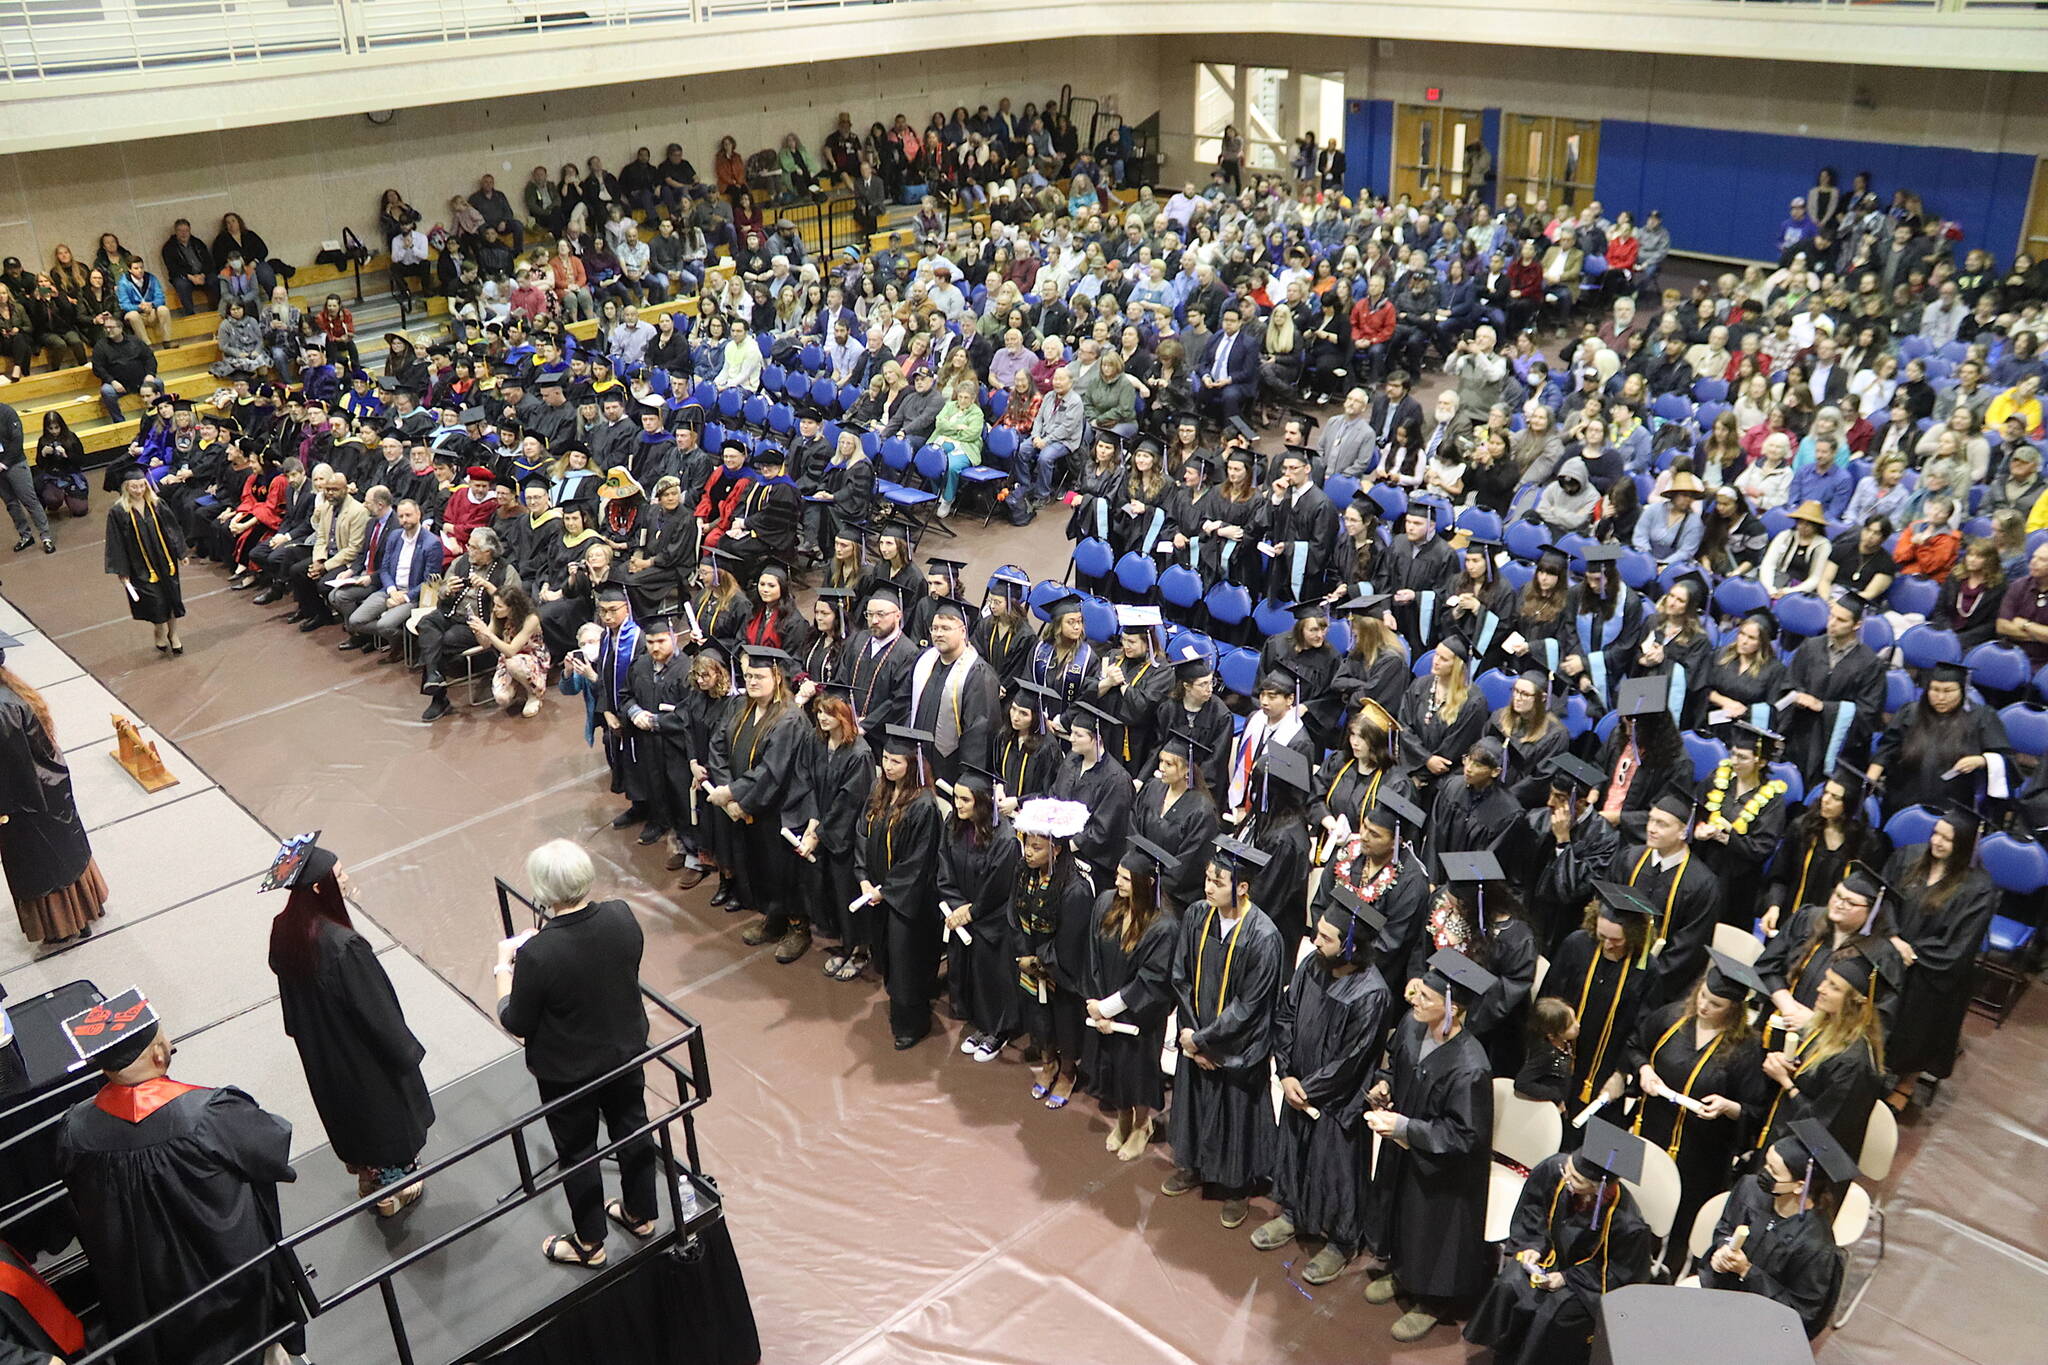 The University of Alaska Southeast class of 2024 receive their degrees during a commencement ceremony Sunday at the UAS Recreation Center. (Mark Sabbatini / Juneau Empire)